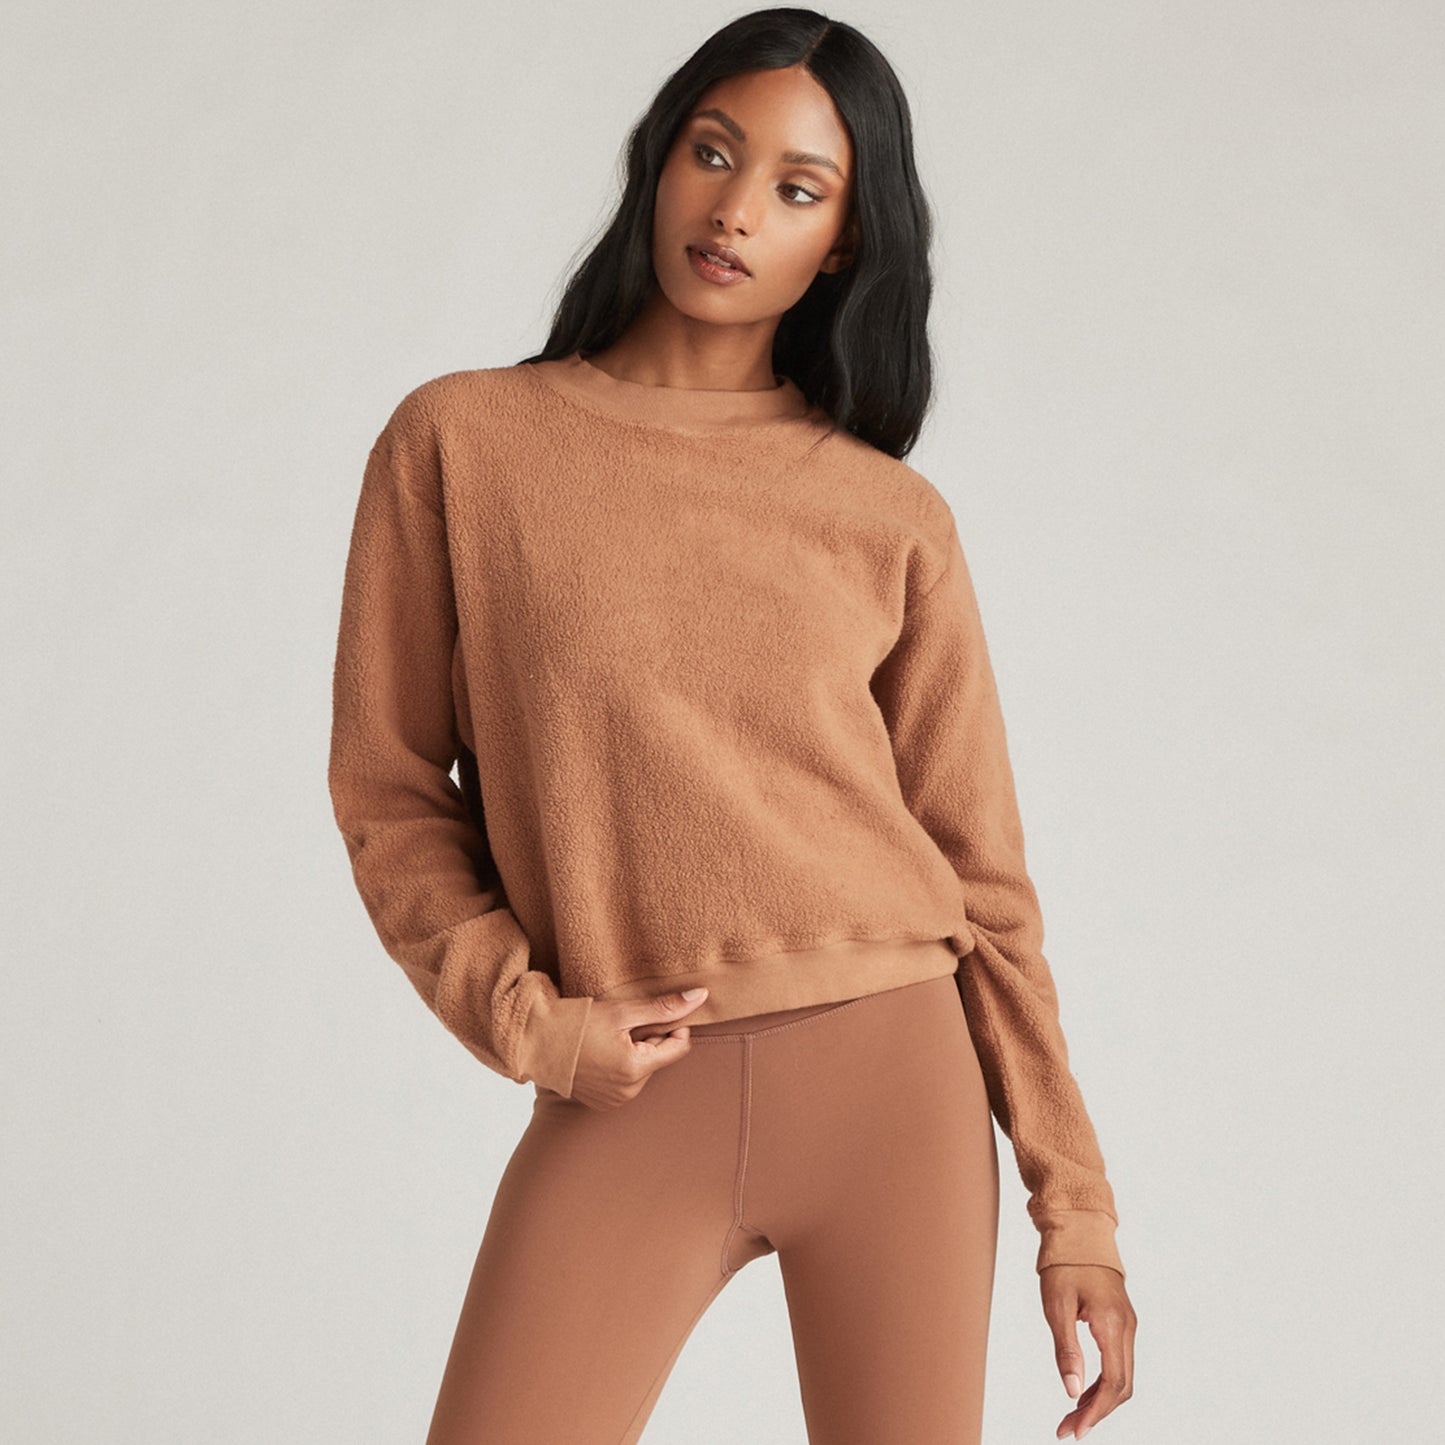 Strut This Georgie Sweatshirt. This slightly cropped pullover is a cold-weather essential. Made from ultra-soft fibers and designed with a chic high neck, this sweatshirt will keep you warm and comfortable all season long.